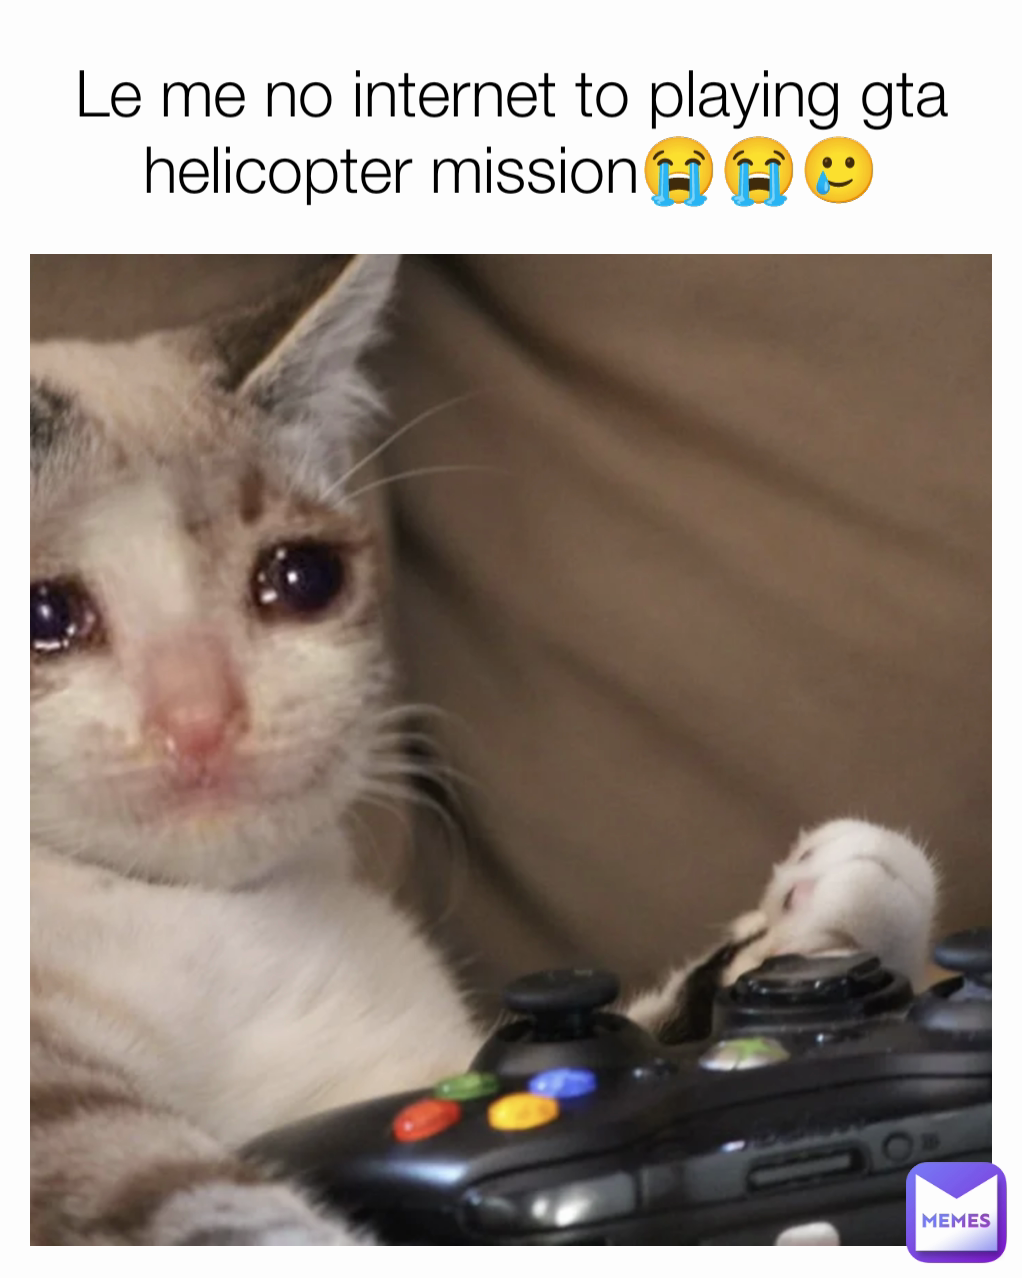 Le me no internet to playing gta helicopter mission😭😭🥲